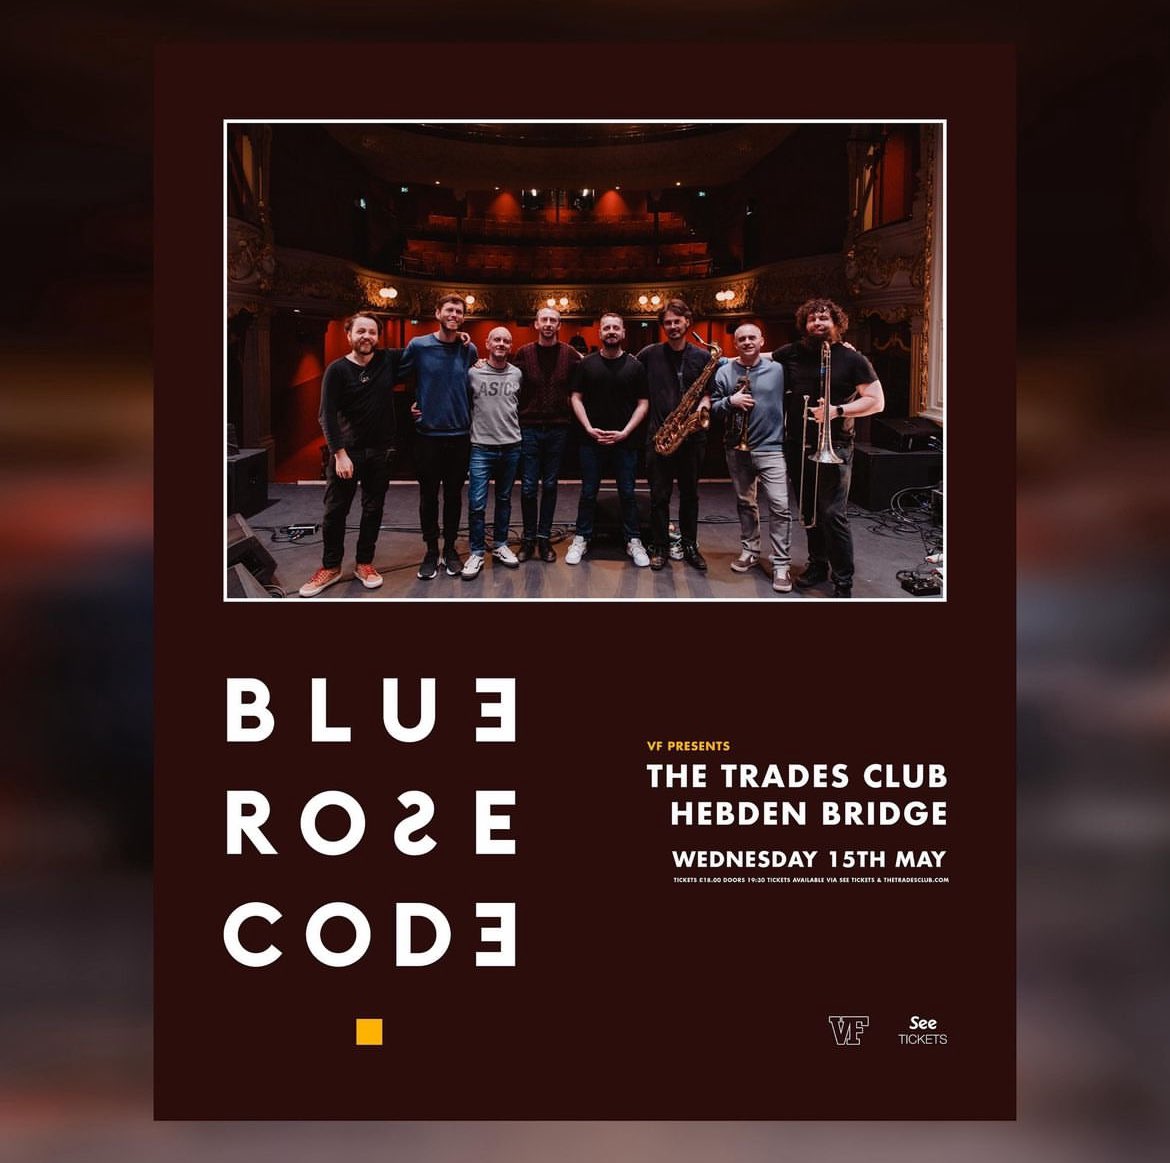 Prior to heading their way to headlining this year’s Sunday night @CamFolkFest with their Caledonian Soul Calvacade.. @BlueRoseCode join us @thetradesclub on 🗓️ 15:05:24 - Their last show @TLRatSaltaire SOLD OUT & now you can see them here >> thetradesclub.com/events/brc 🎫